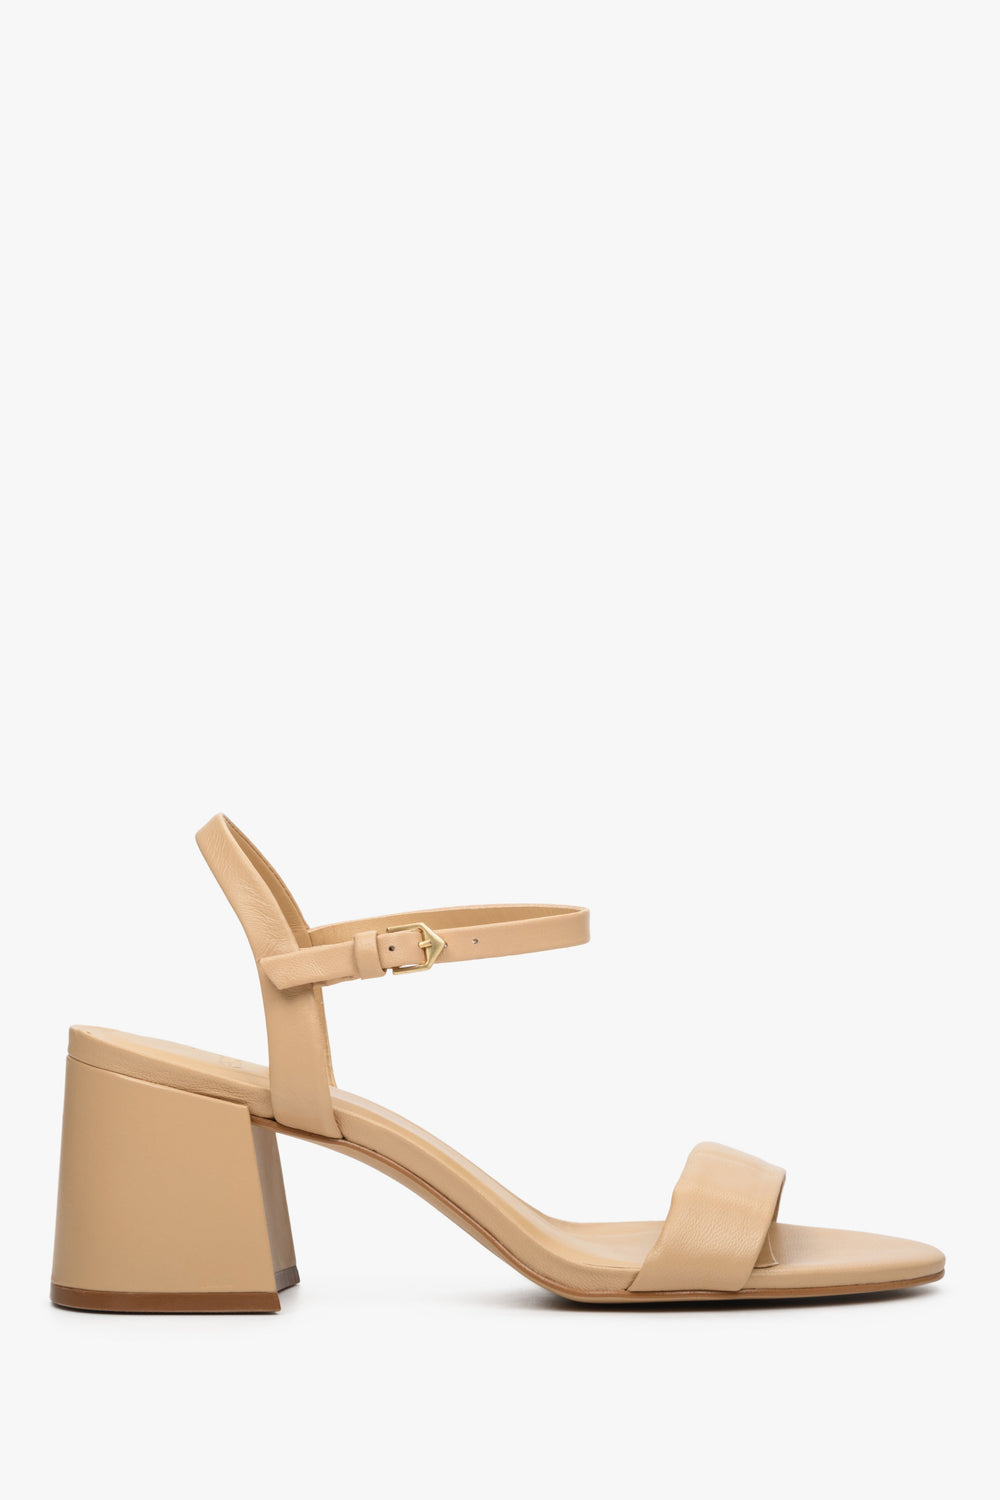 Women's Beige Sandals made of Genuine Leather with a Square Heel Estro ER00112883.